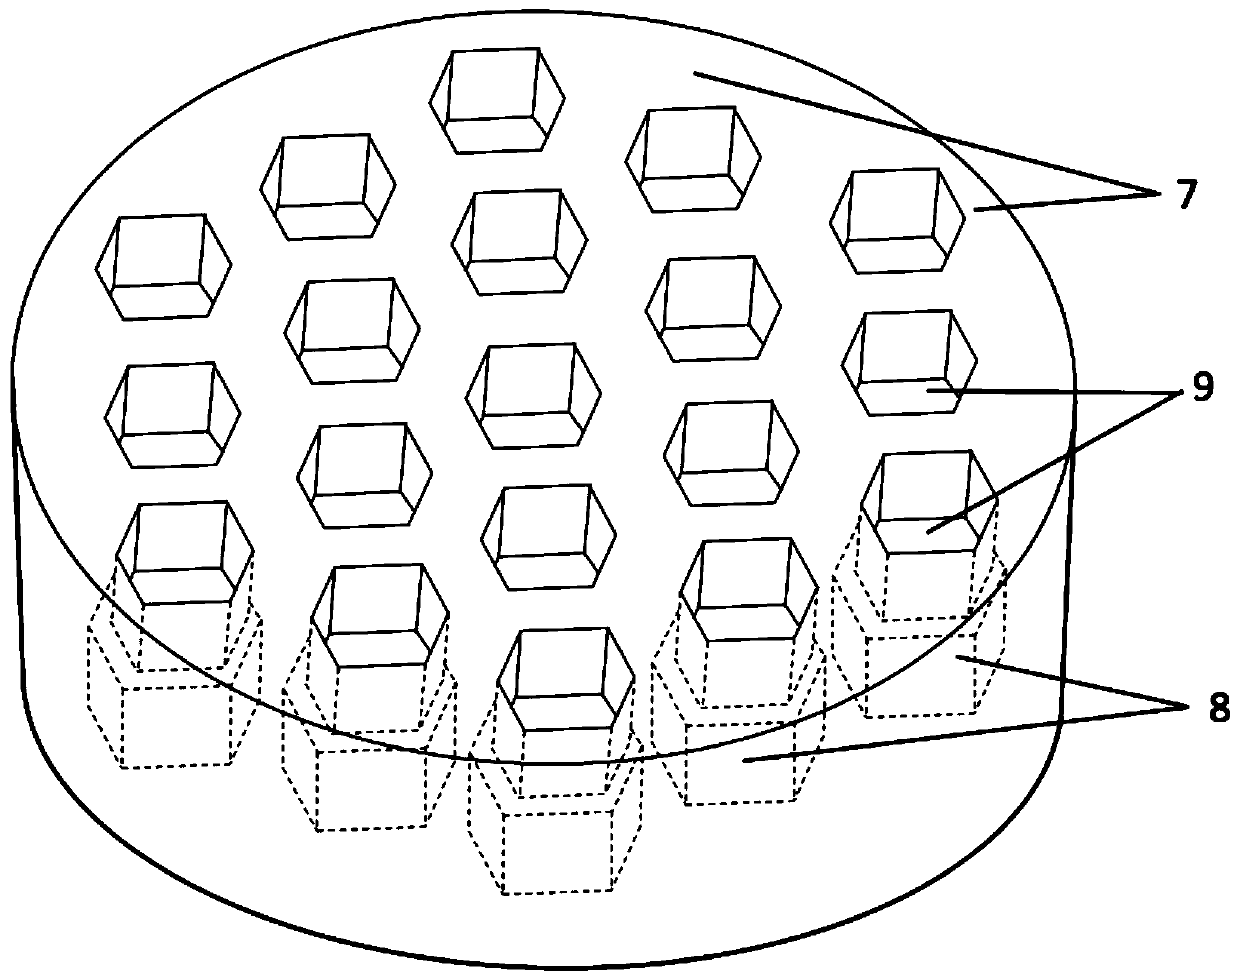 A multi-channel honeycomb array crucible with the same temperature field